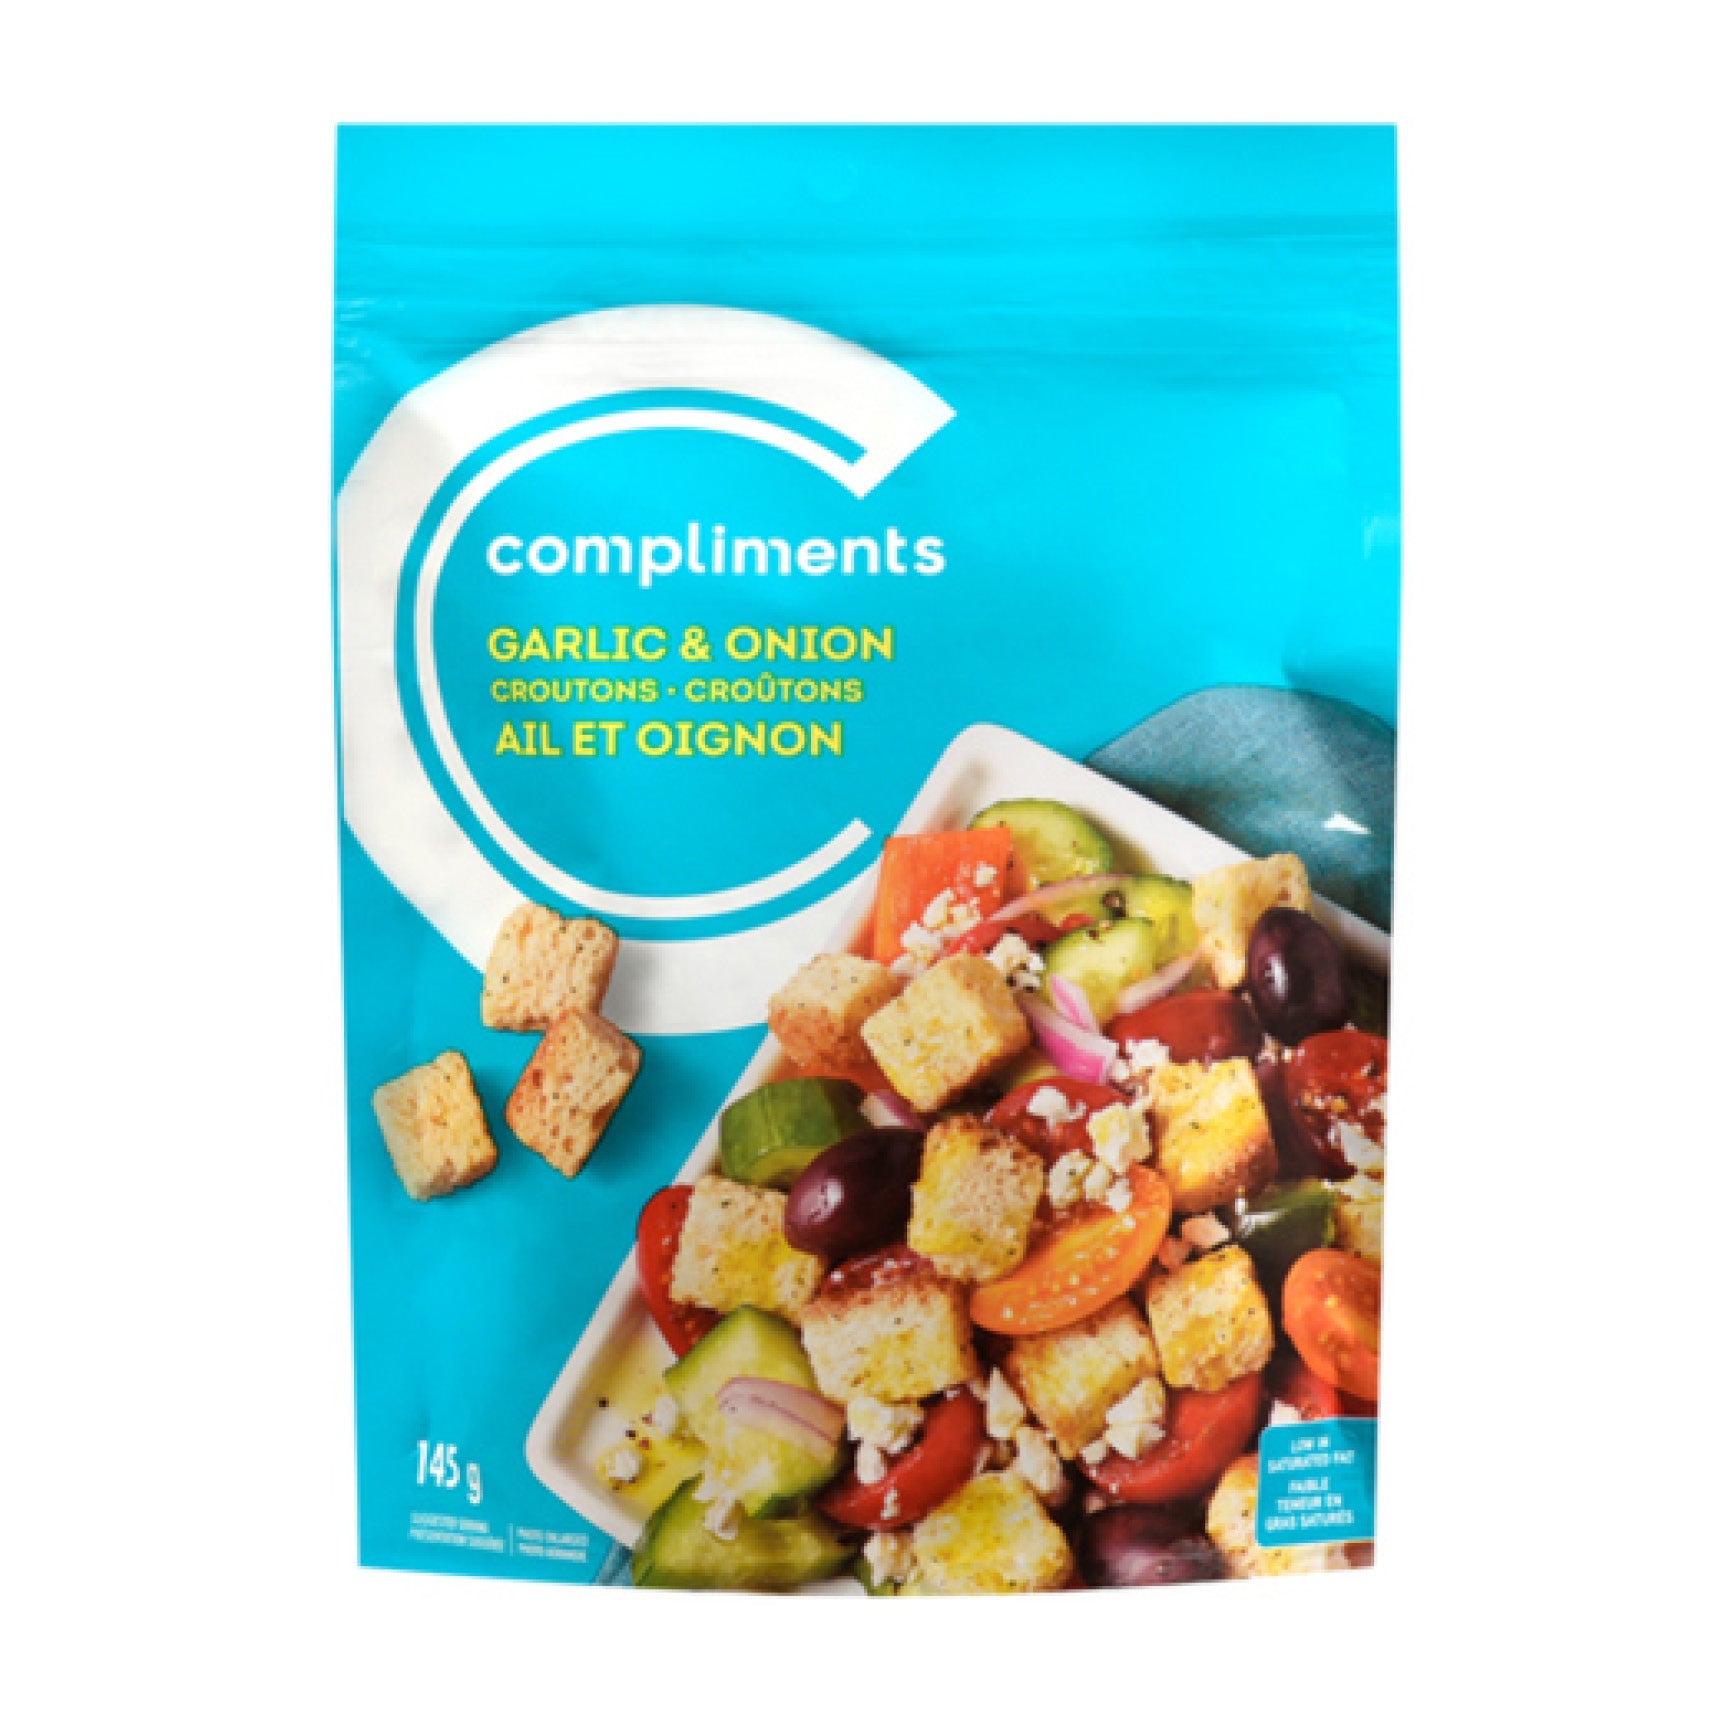 Compliments Garlic & Onion Croutons 145g